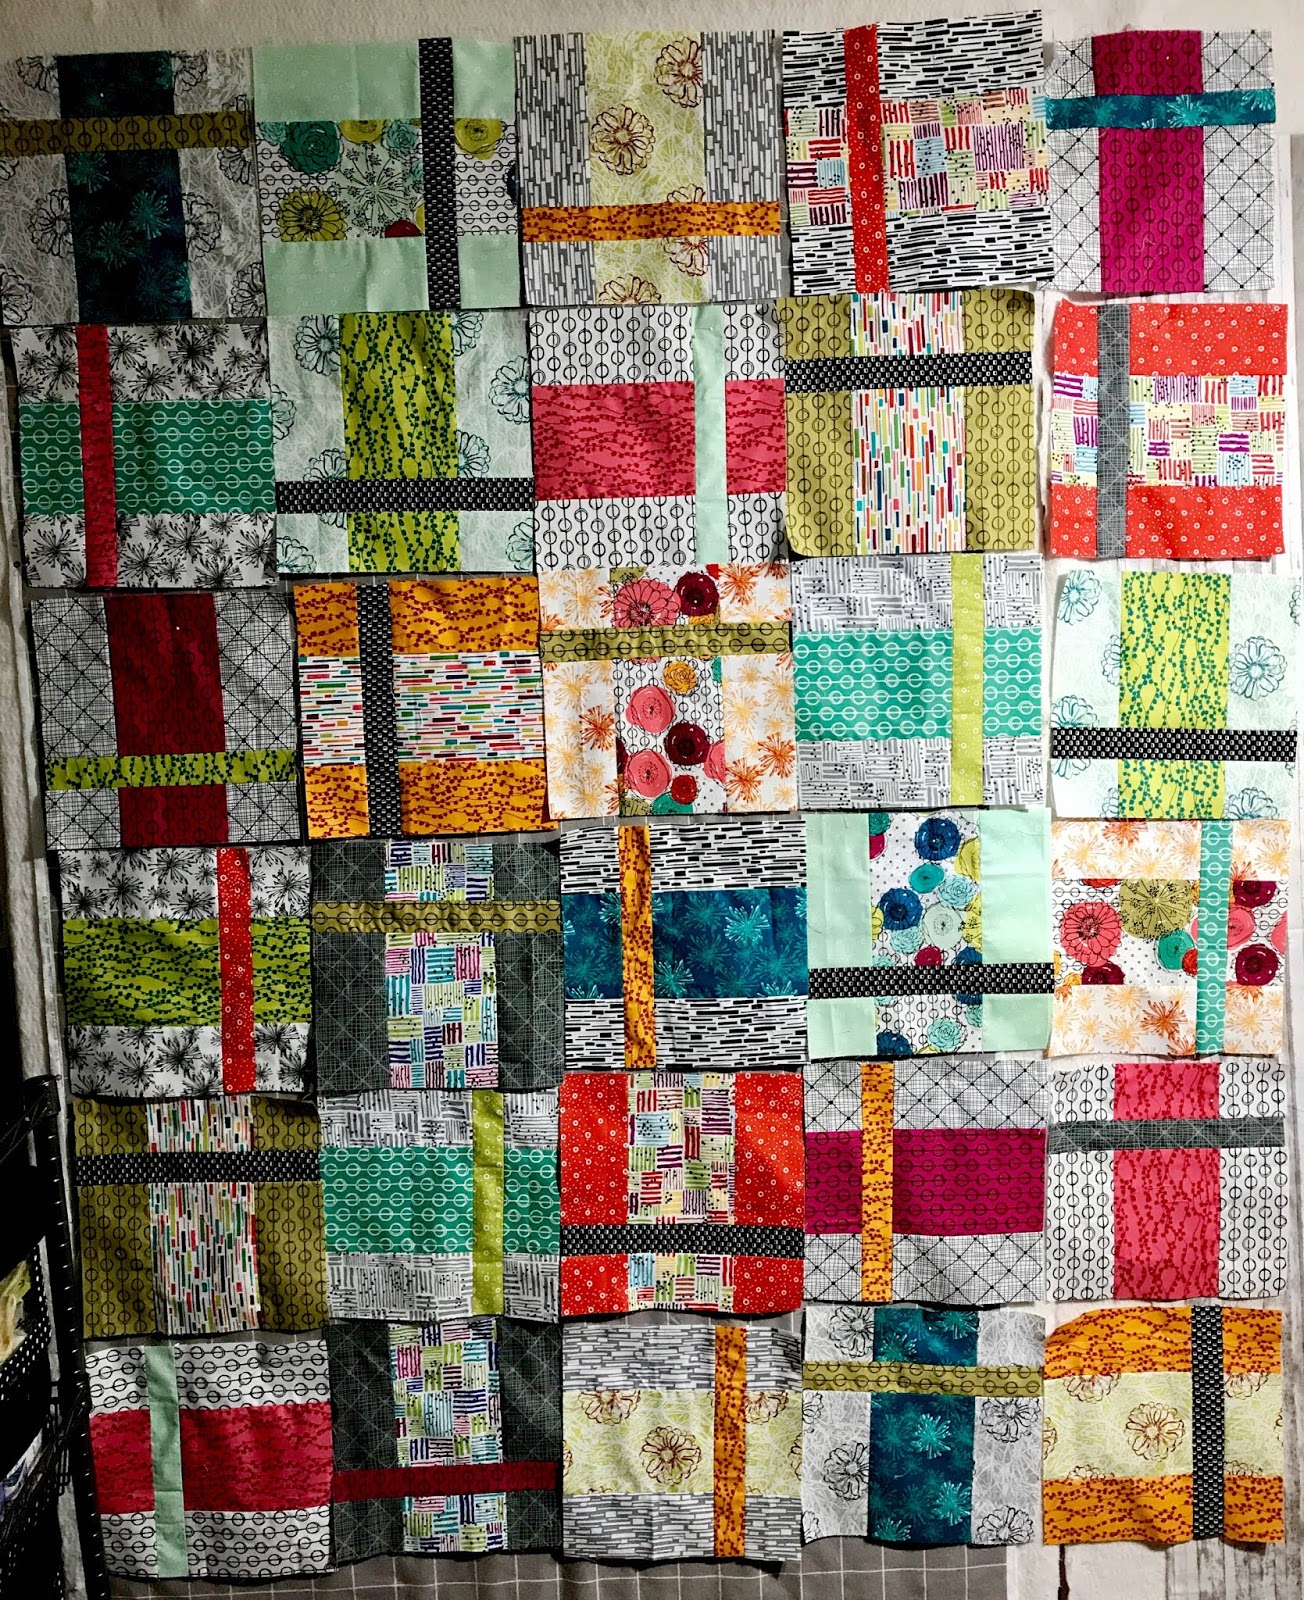 June Stripology Quilt with Janet